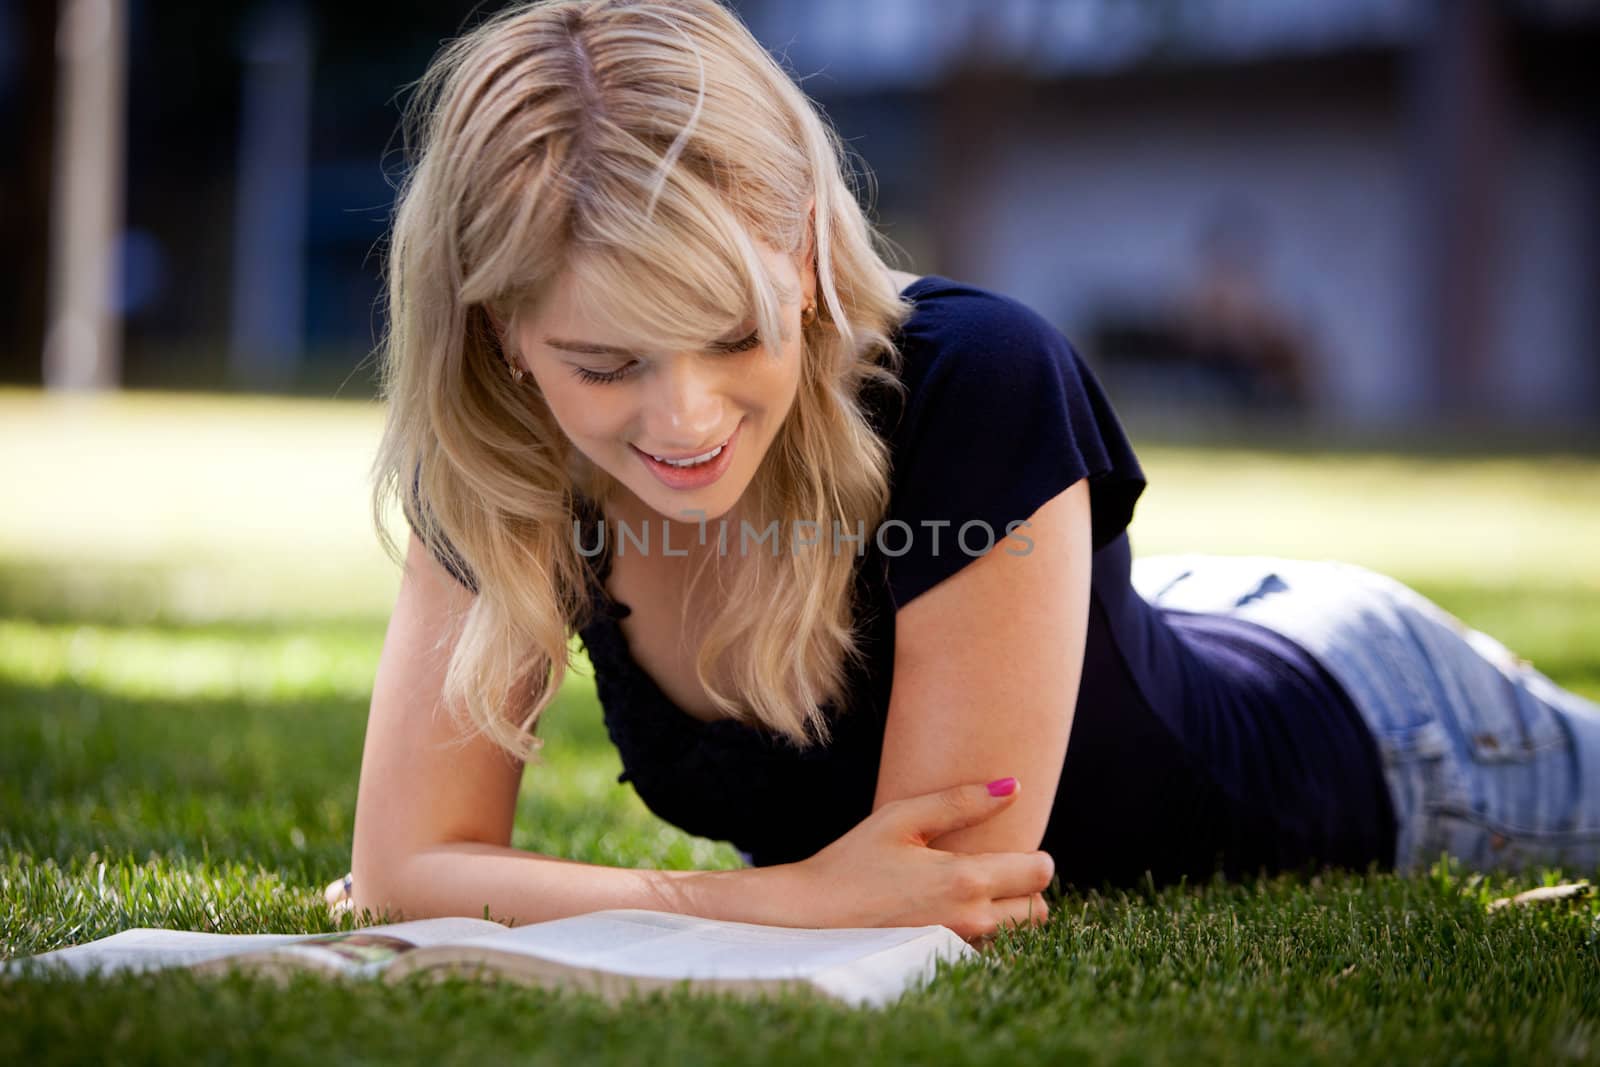 Smiling university student reading a text book outdoors